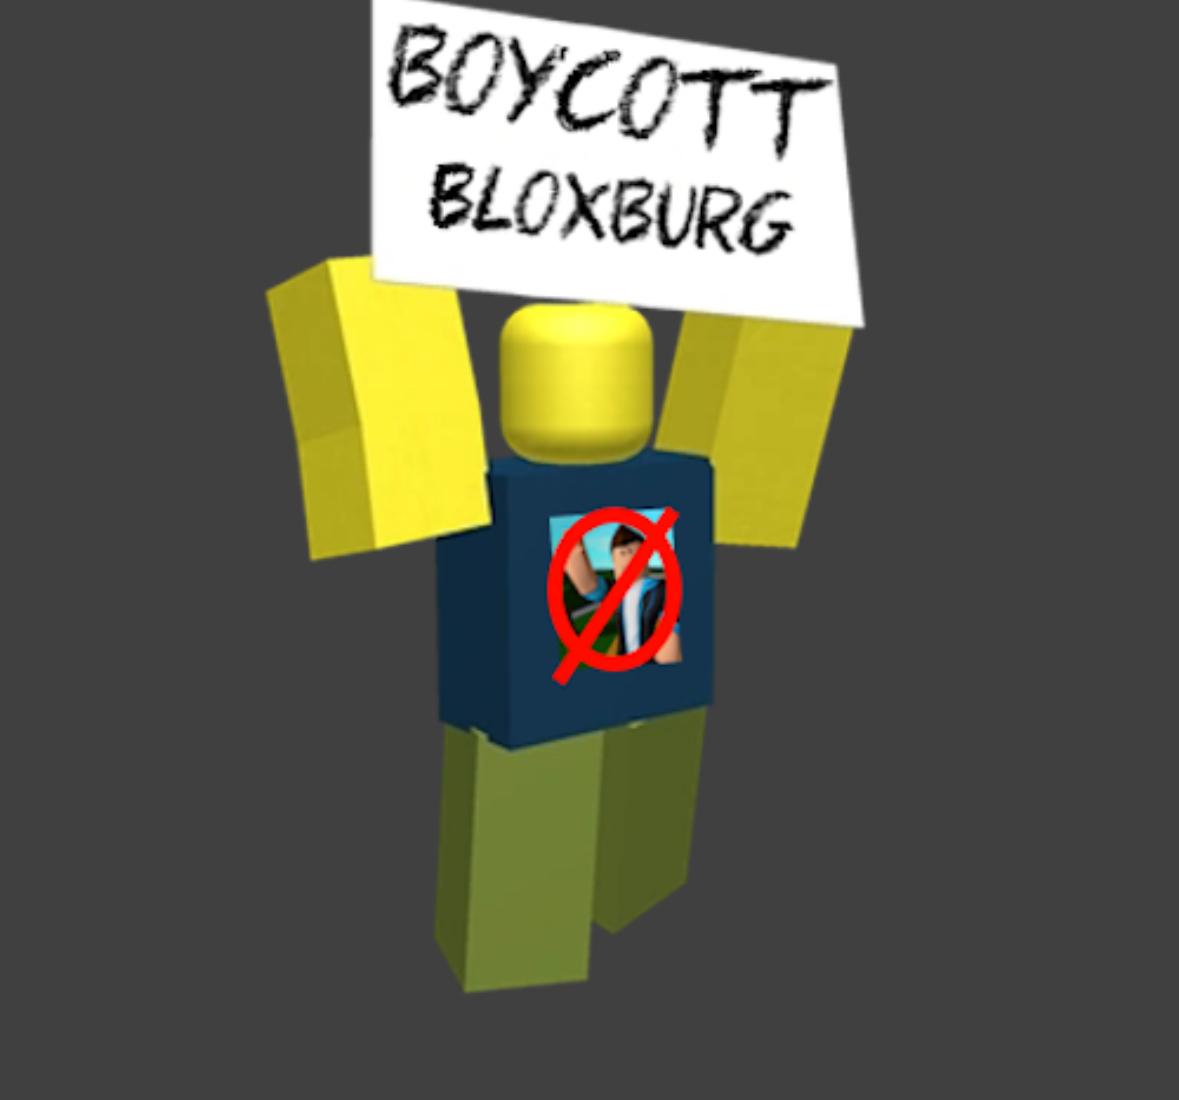 #BOYCOTTBLOXBURG #bloxburg #equalpay PROTEST ON BLOXBURG THEY THINK THEY CAN IGNORE US BUT THEY WONT WE MUST MAKE CHANGE!! DOWN WITH EQUAL PAY AND FEES